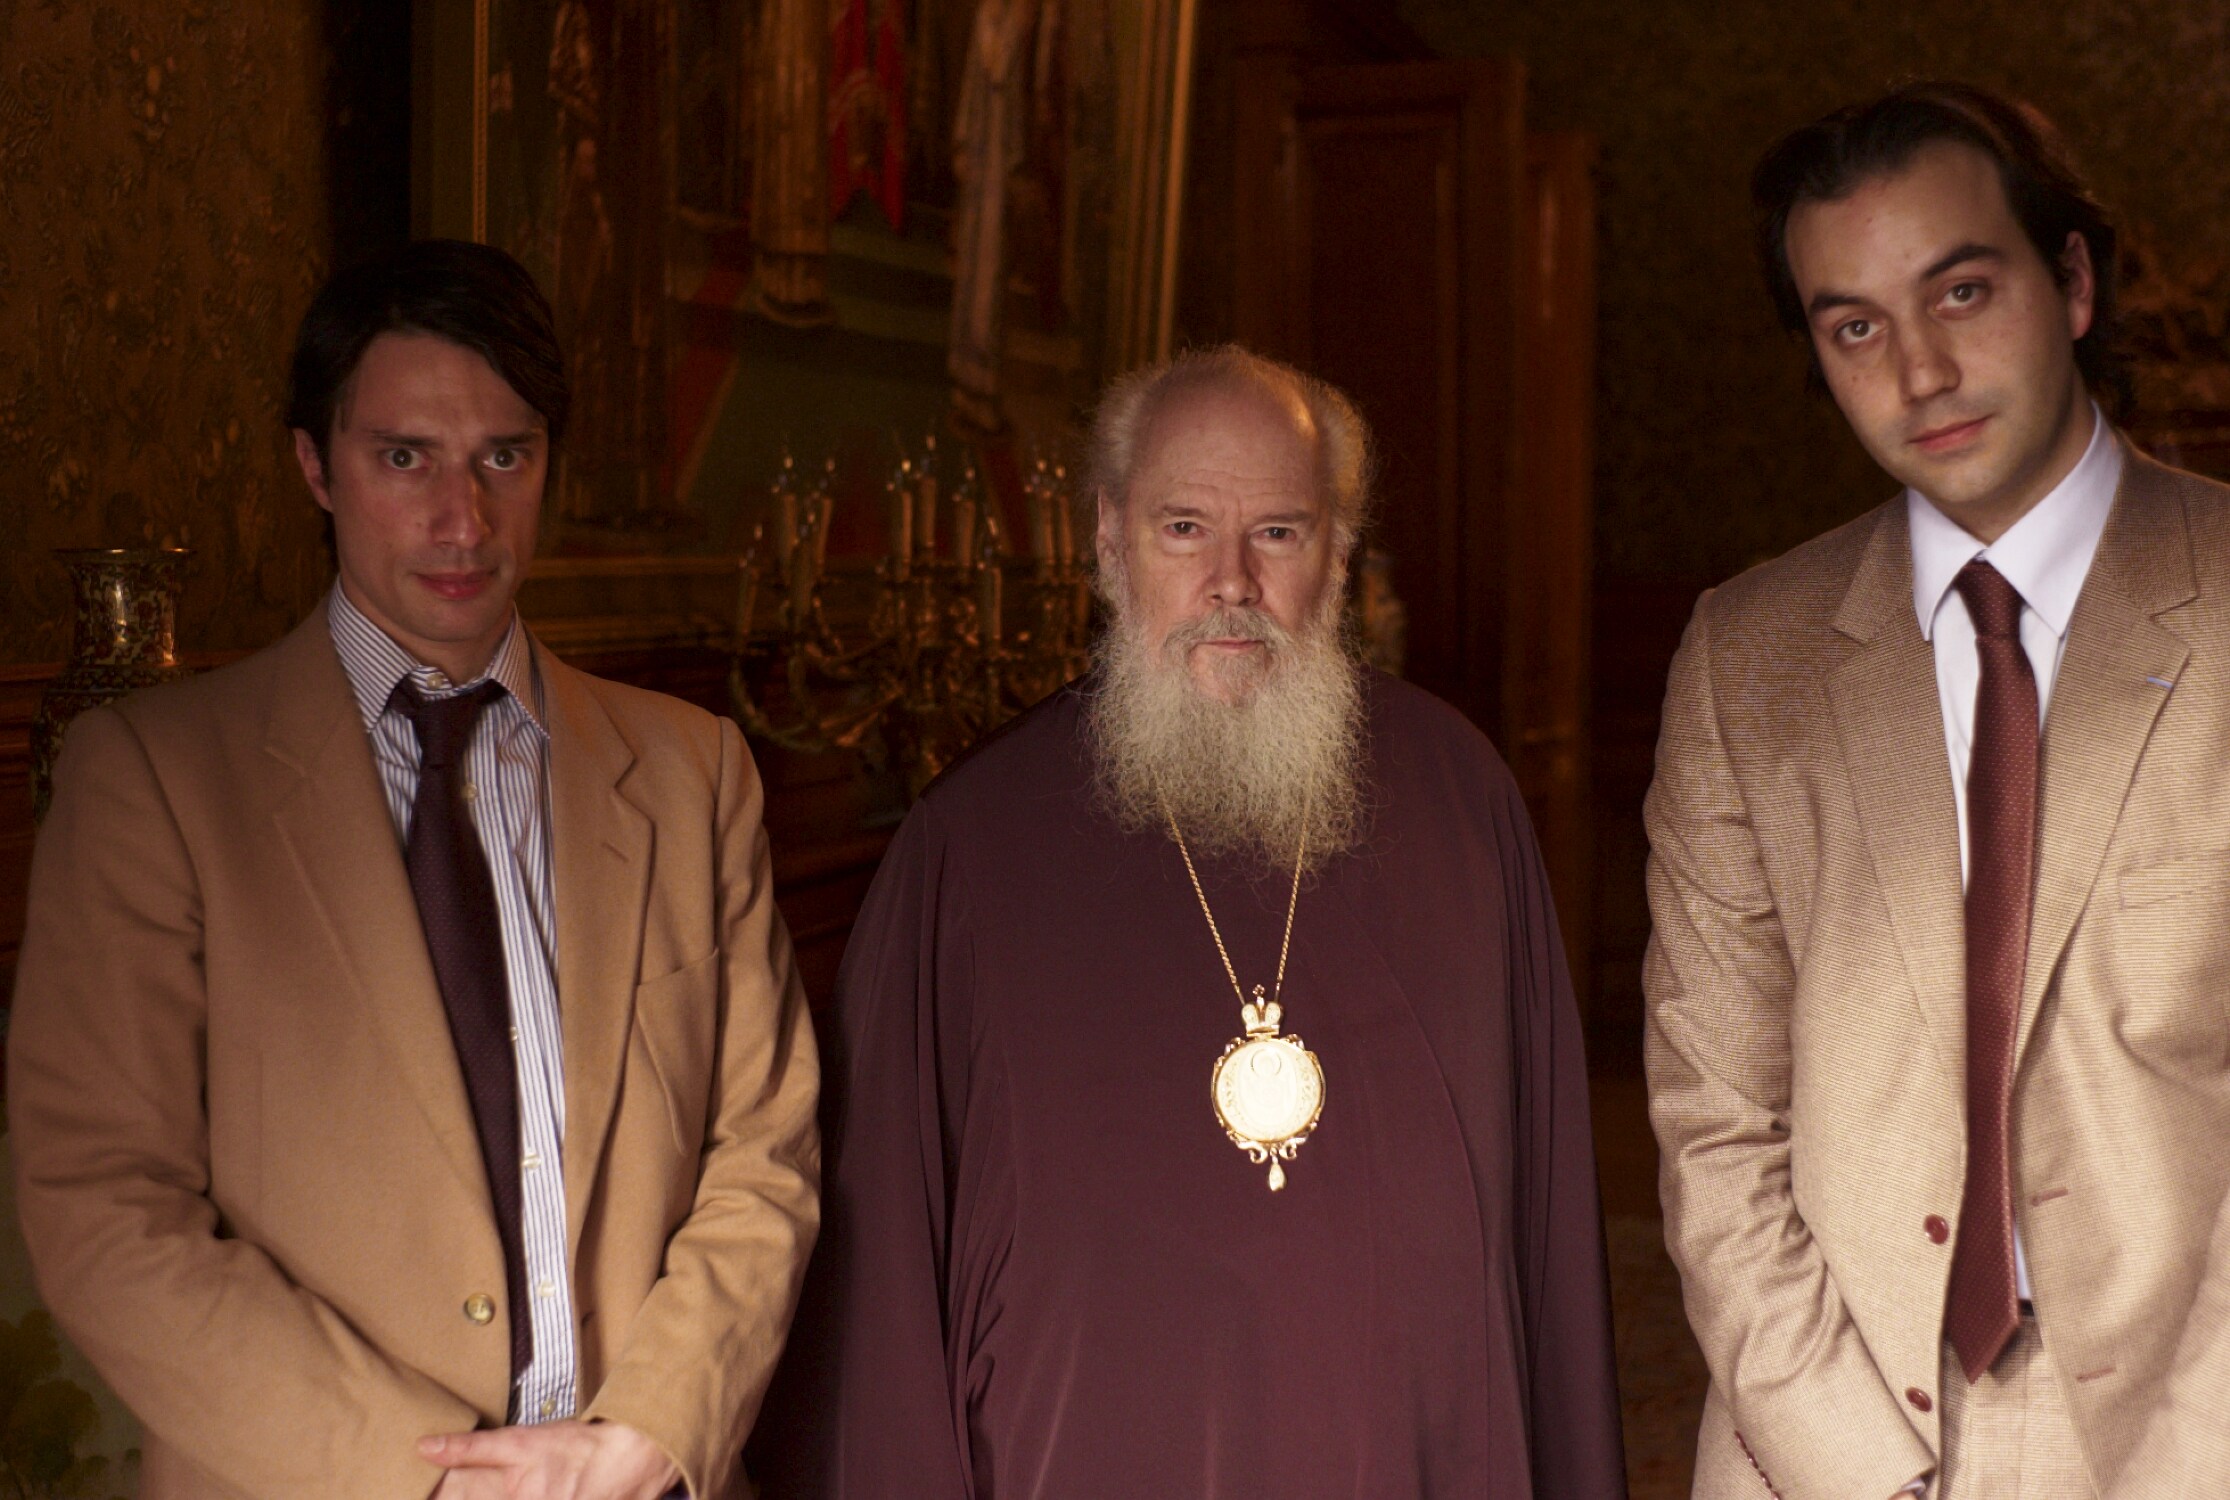 Gedeon Naudet;Jules Naudet; Alexei II, Patriarch of Moscow and head of the Russian Orthodox Church